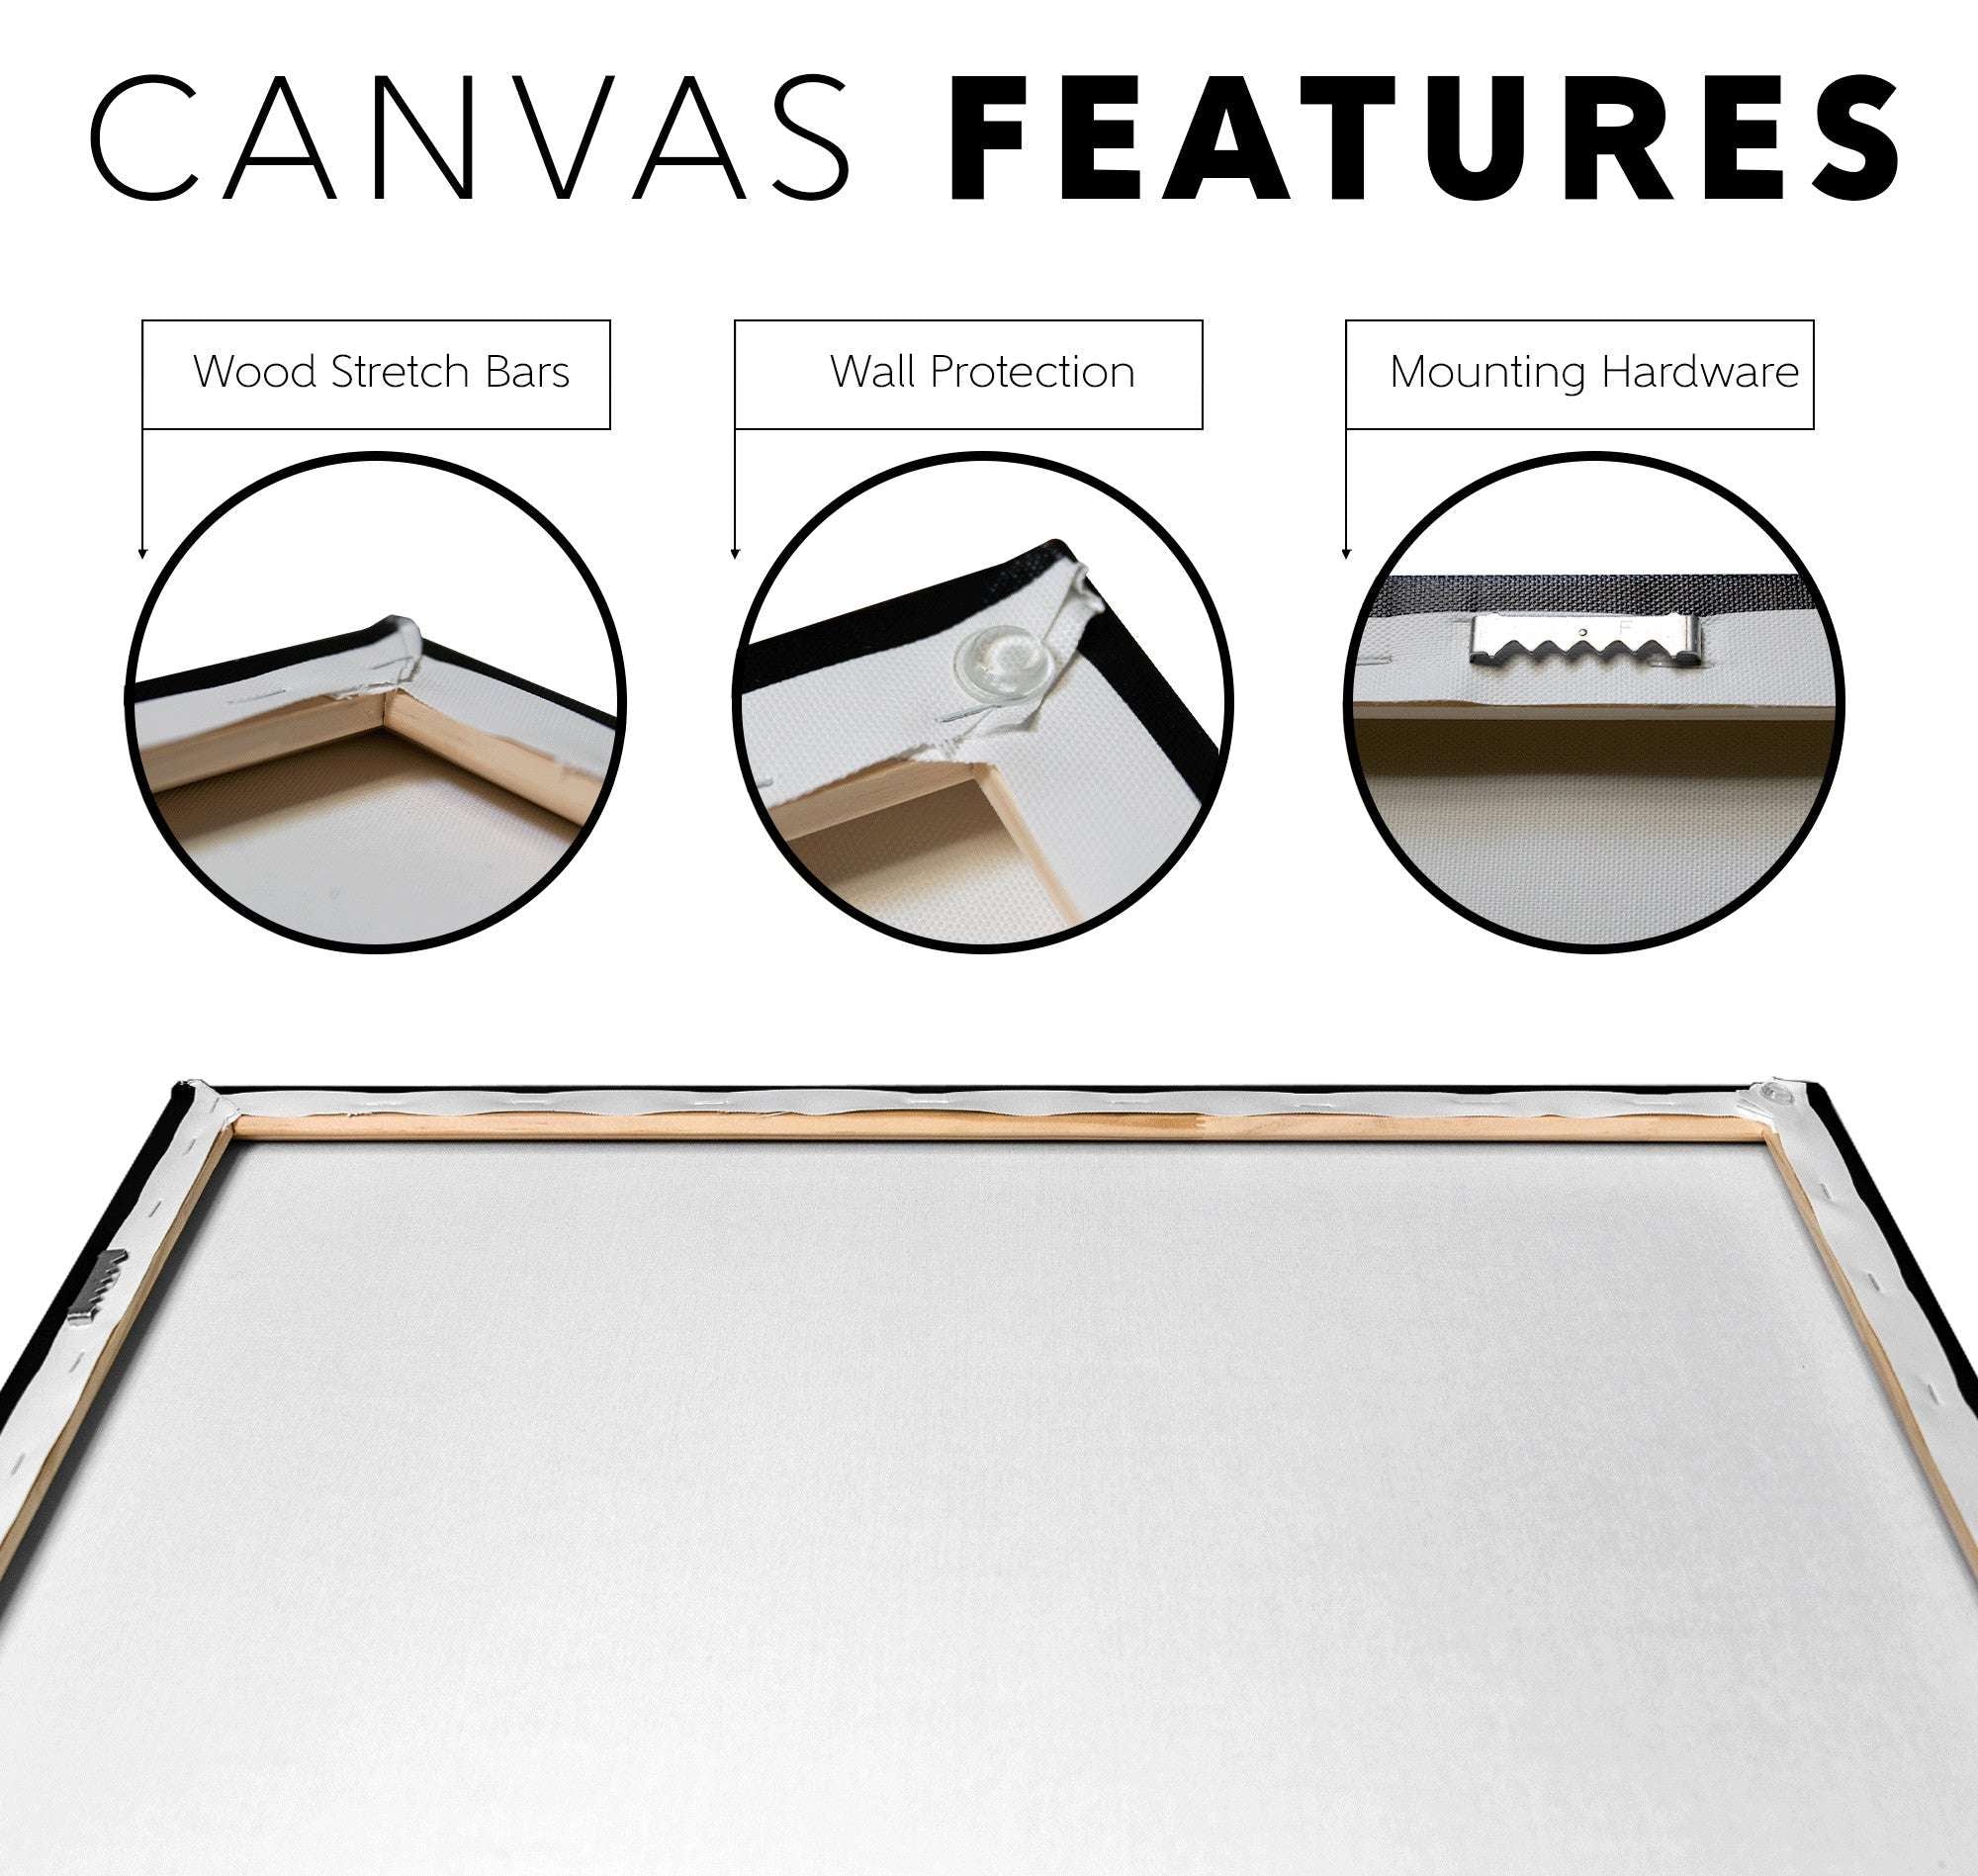 A graphic showing the features of a Canvas Raven Print: wood stretch bars, wall protection, and mounting hardware, each with a close-up image.